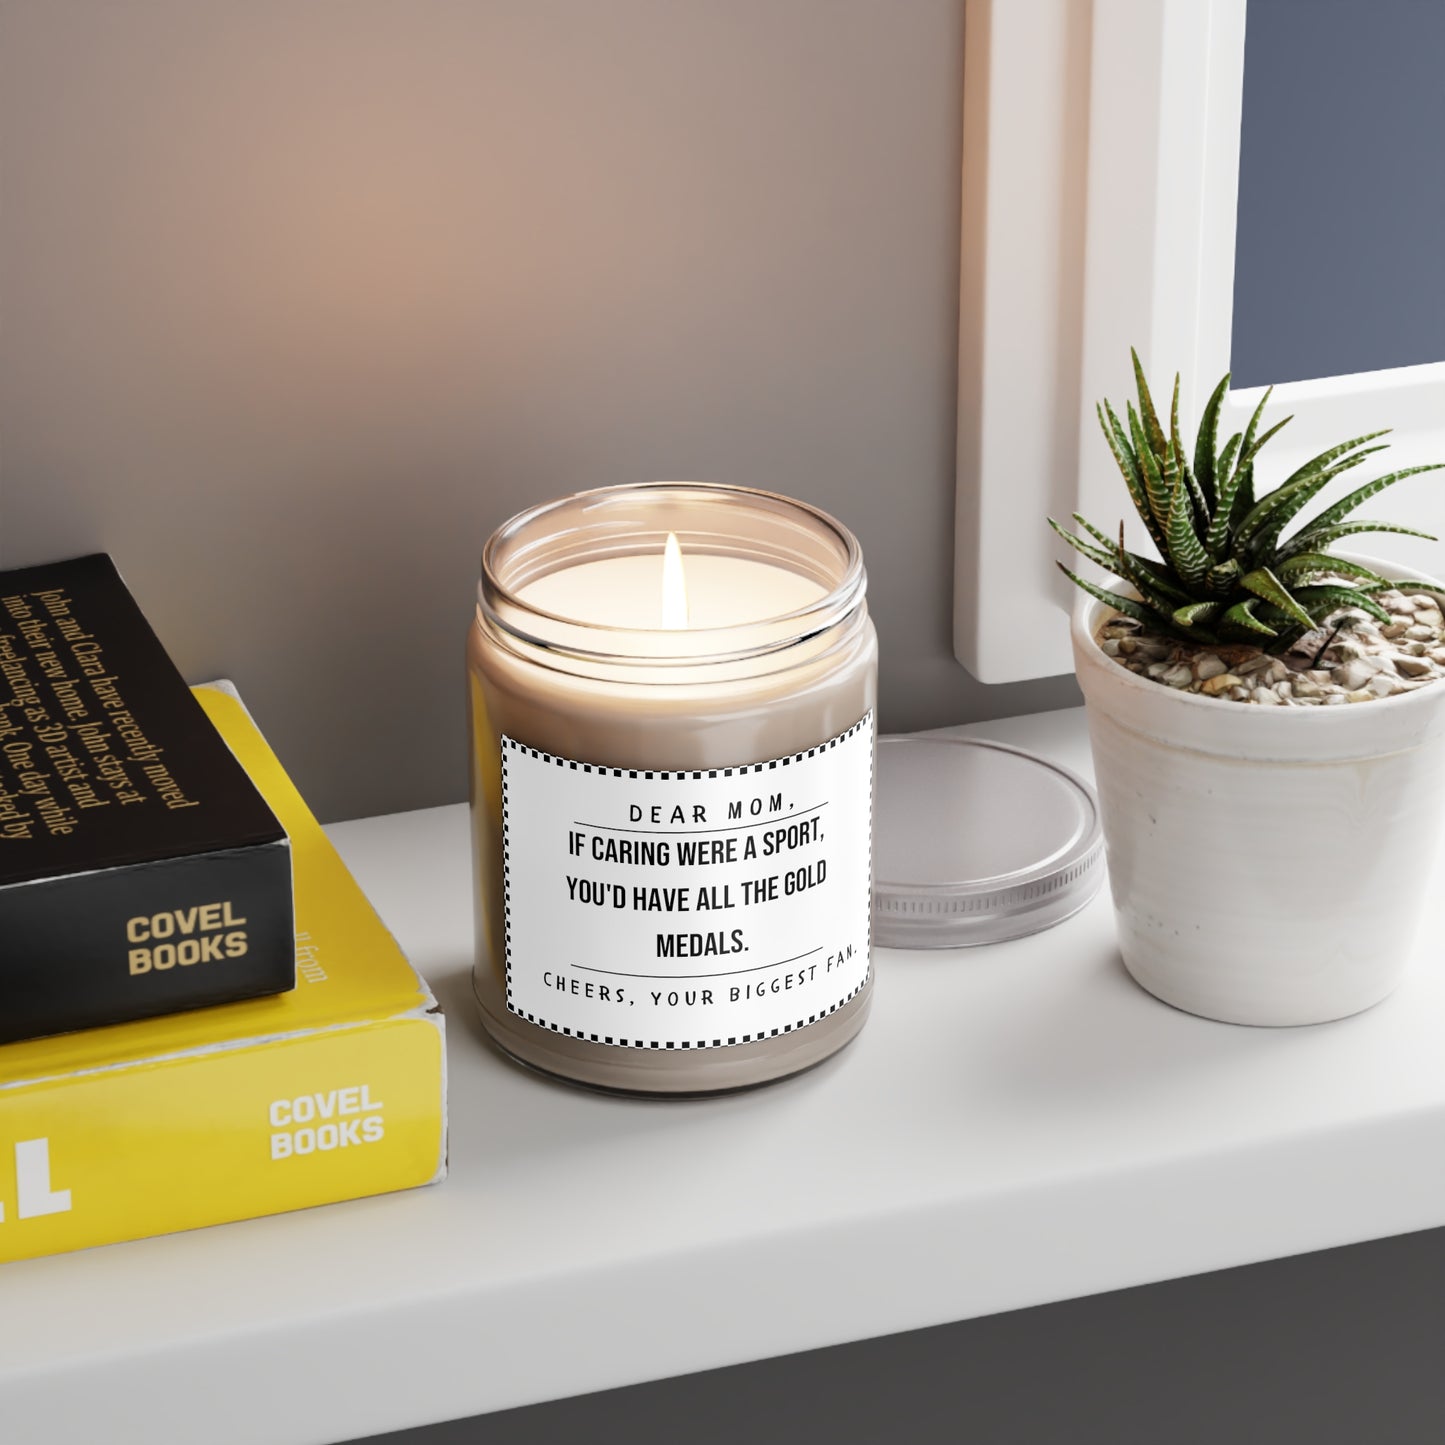 If Caring Were A Sport, You'd Have All The Gold Medals Scented Candles For Mom